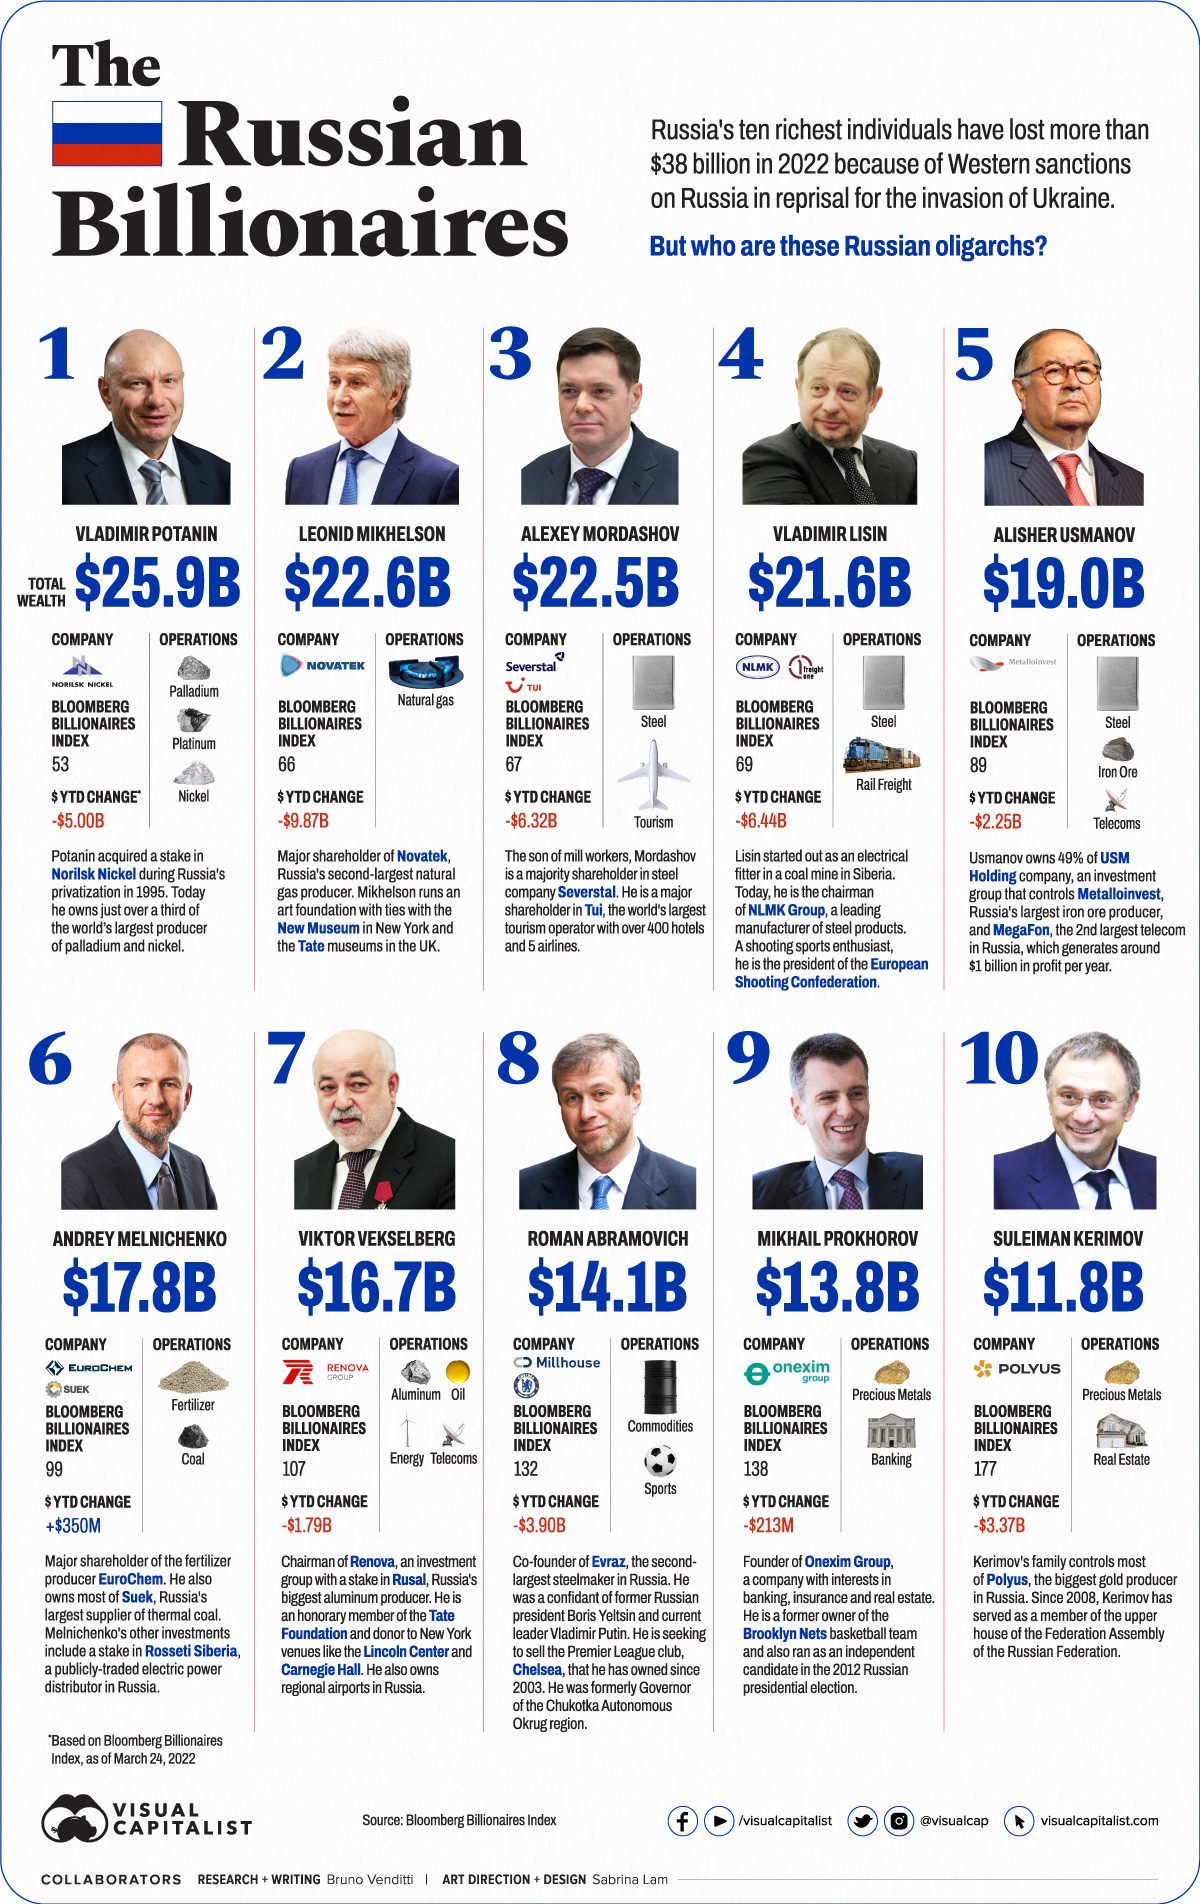 Infographic: Who are the Russian Oligarchs?